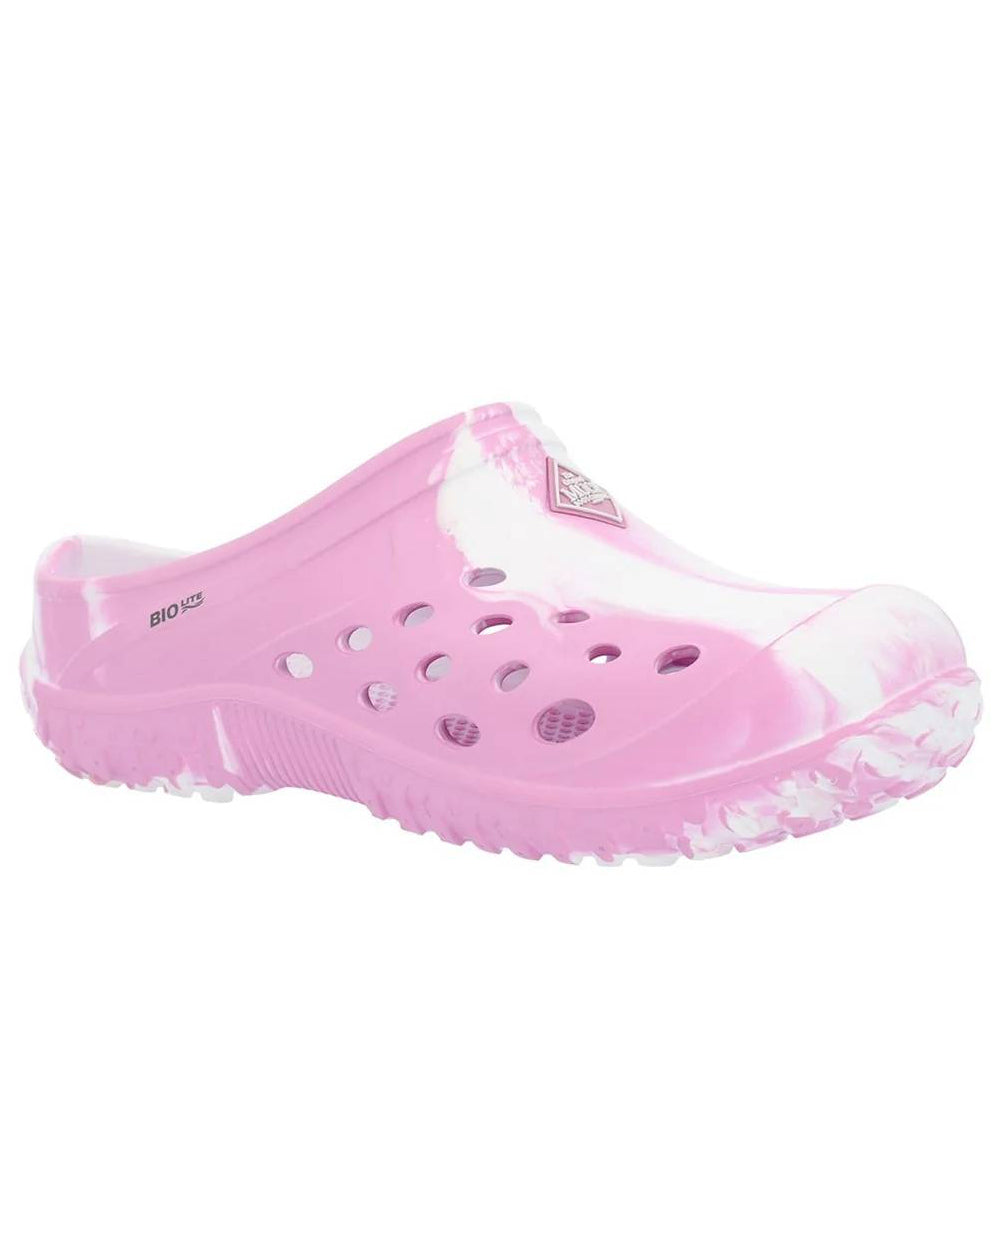 Pink Swirl Coloured Muck Boots Childrens Muckster Lite Clogs On A White Background 